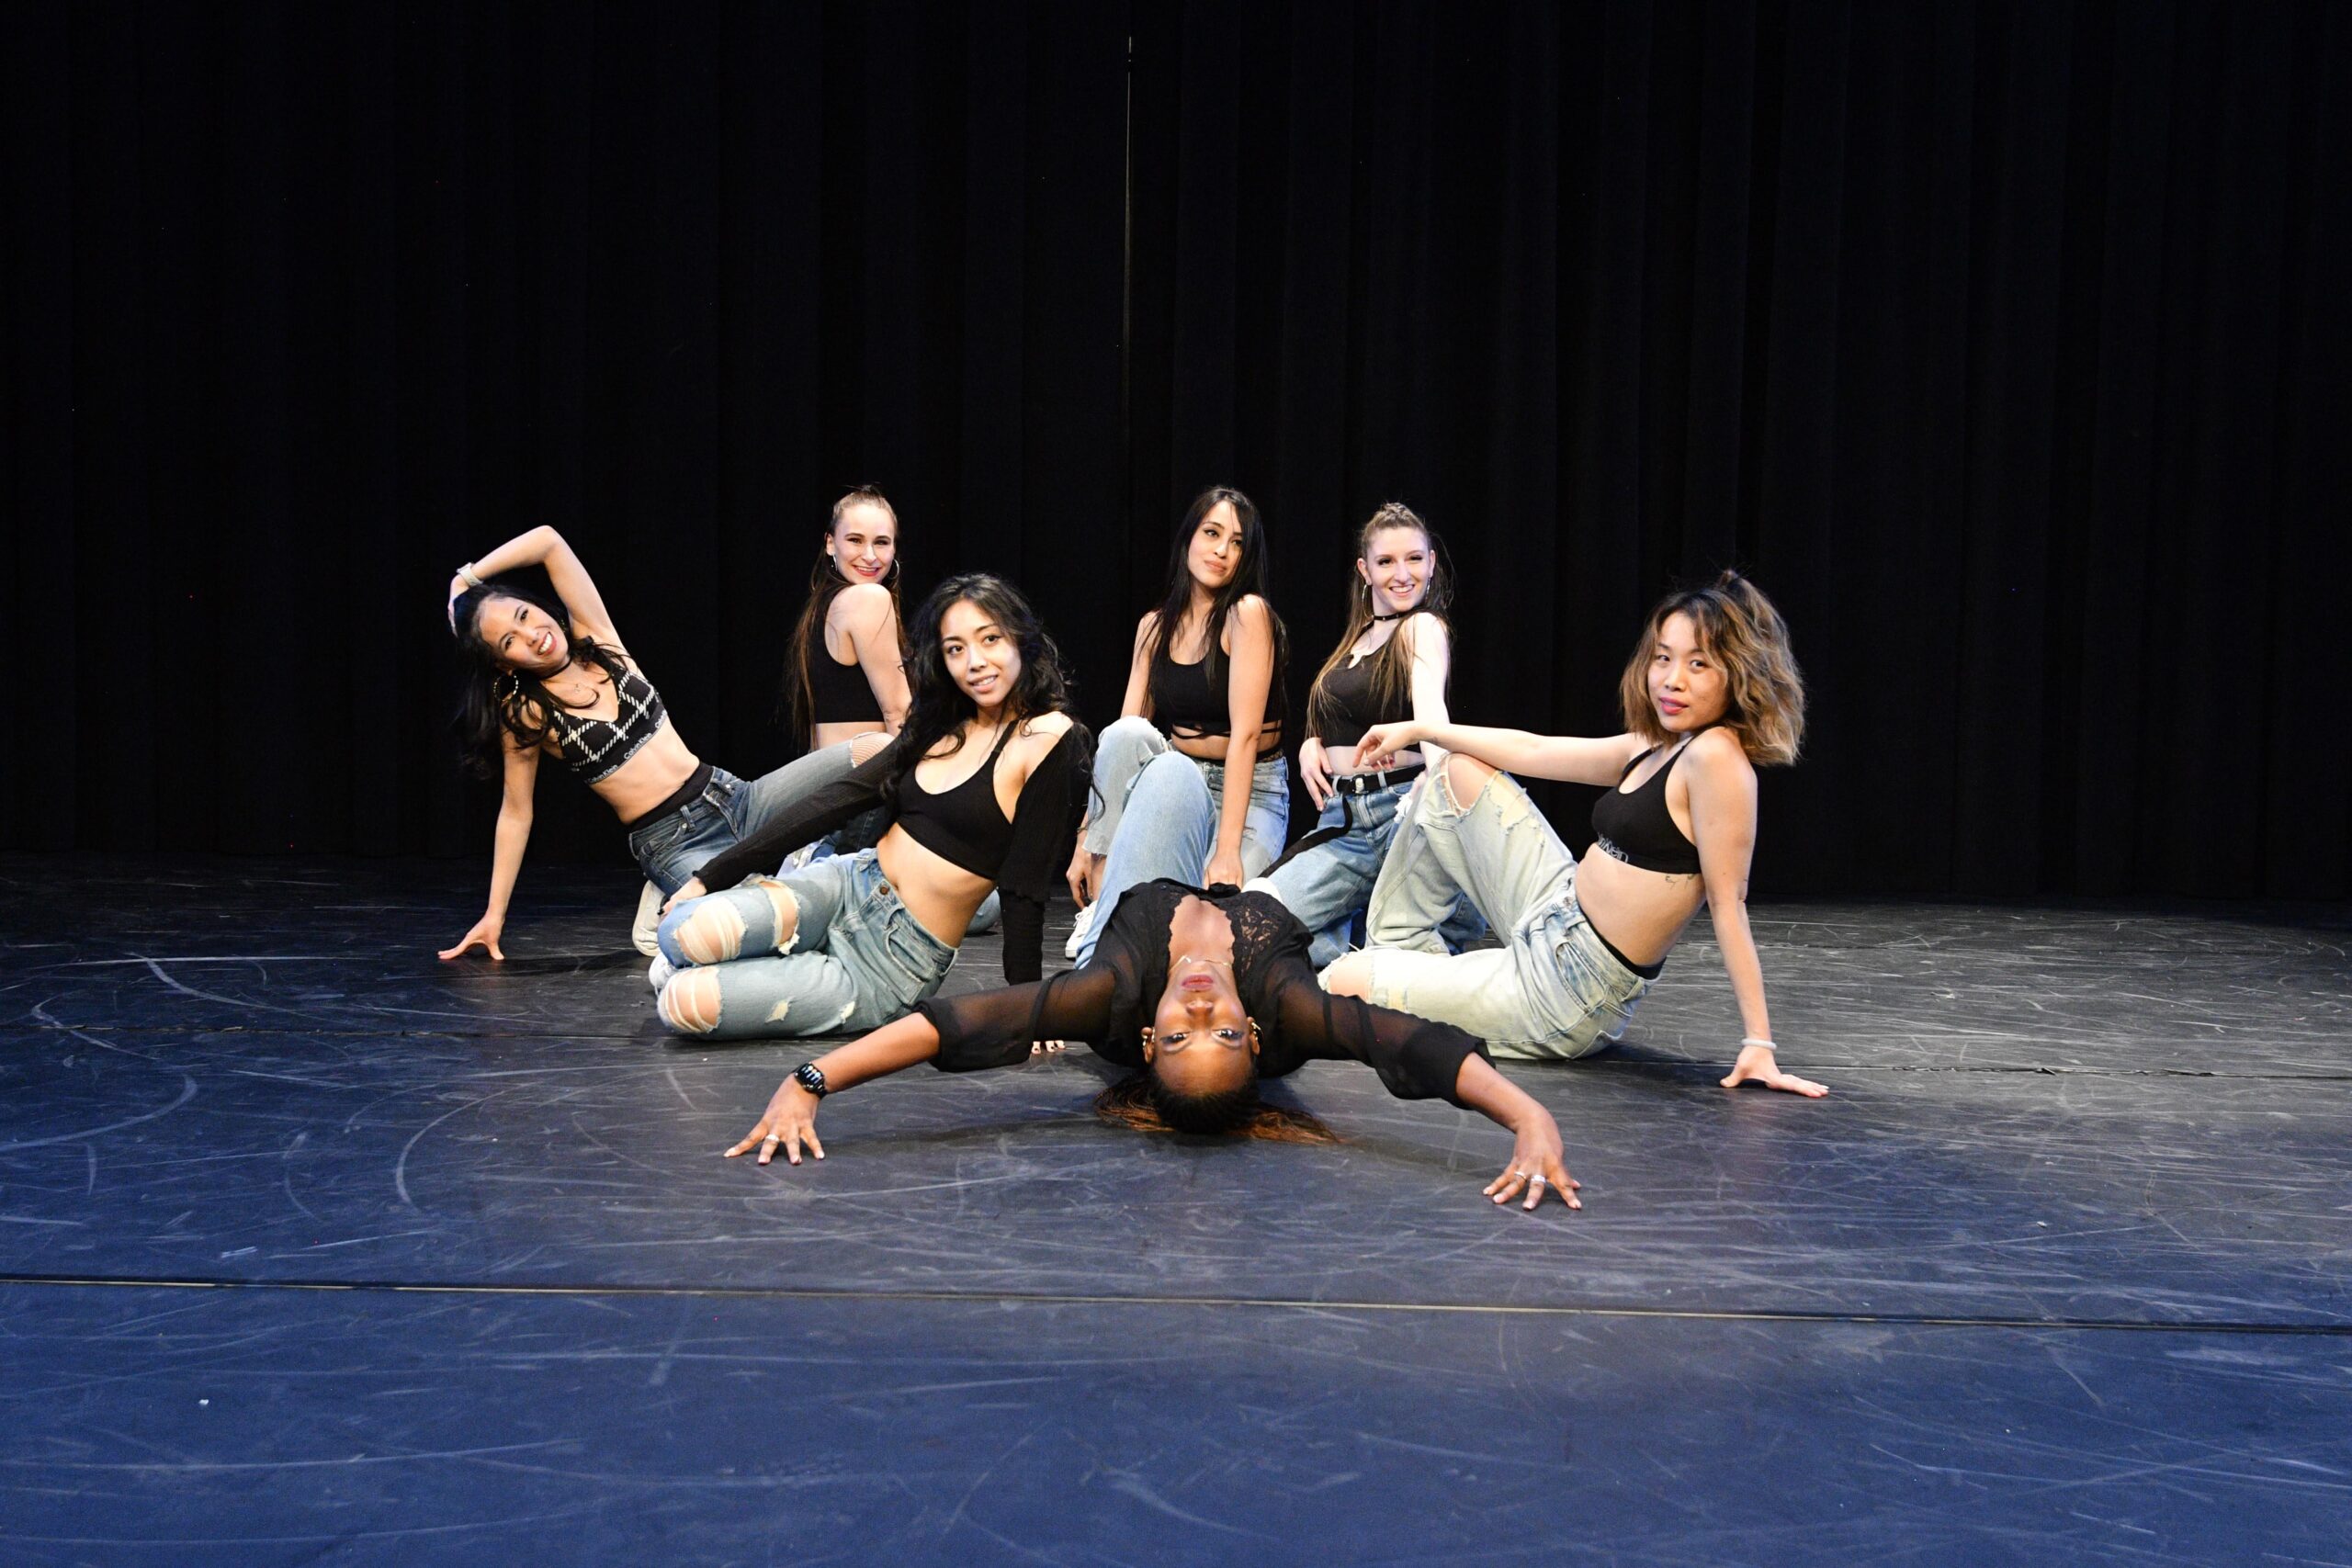 HipHop @ Tucson Academy of Music & Dance | Dance picture poses, Hip hop  dance poses, Draw the squad